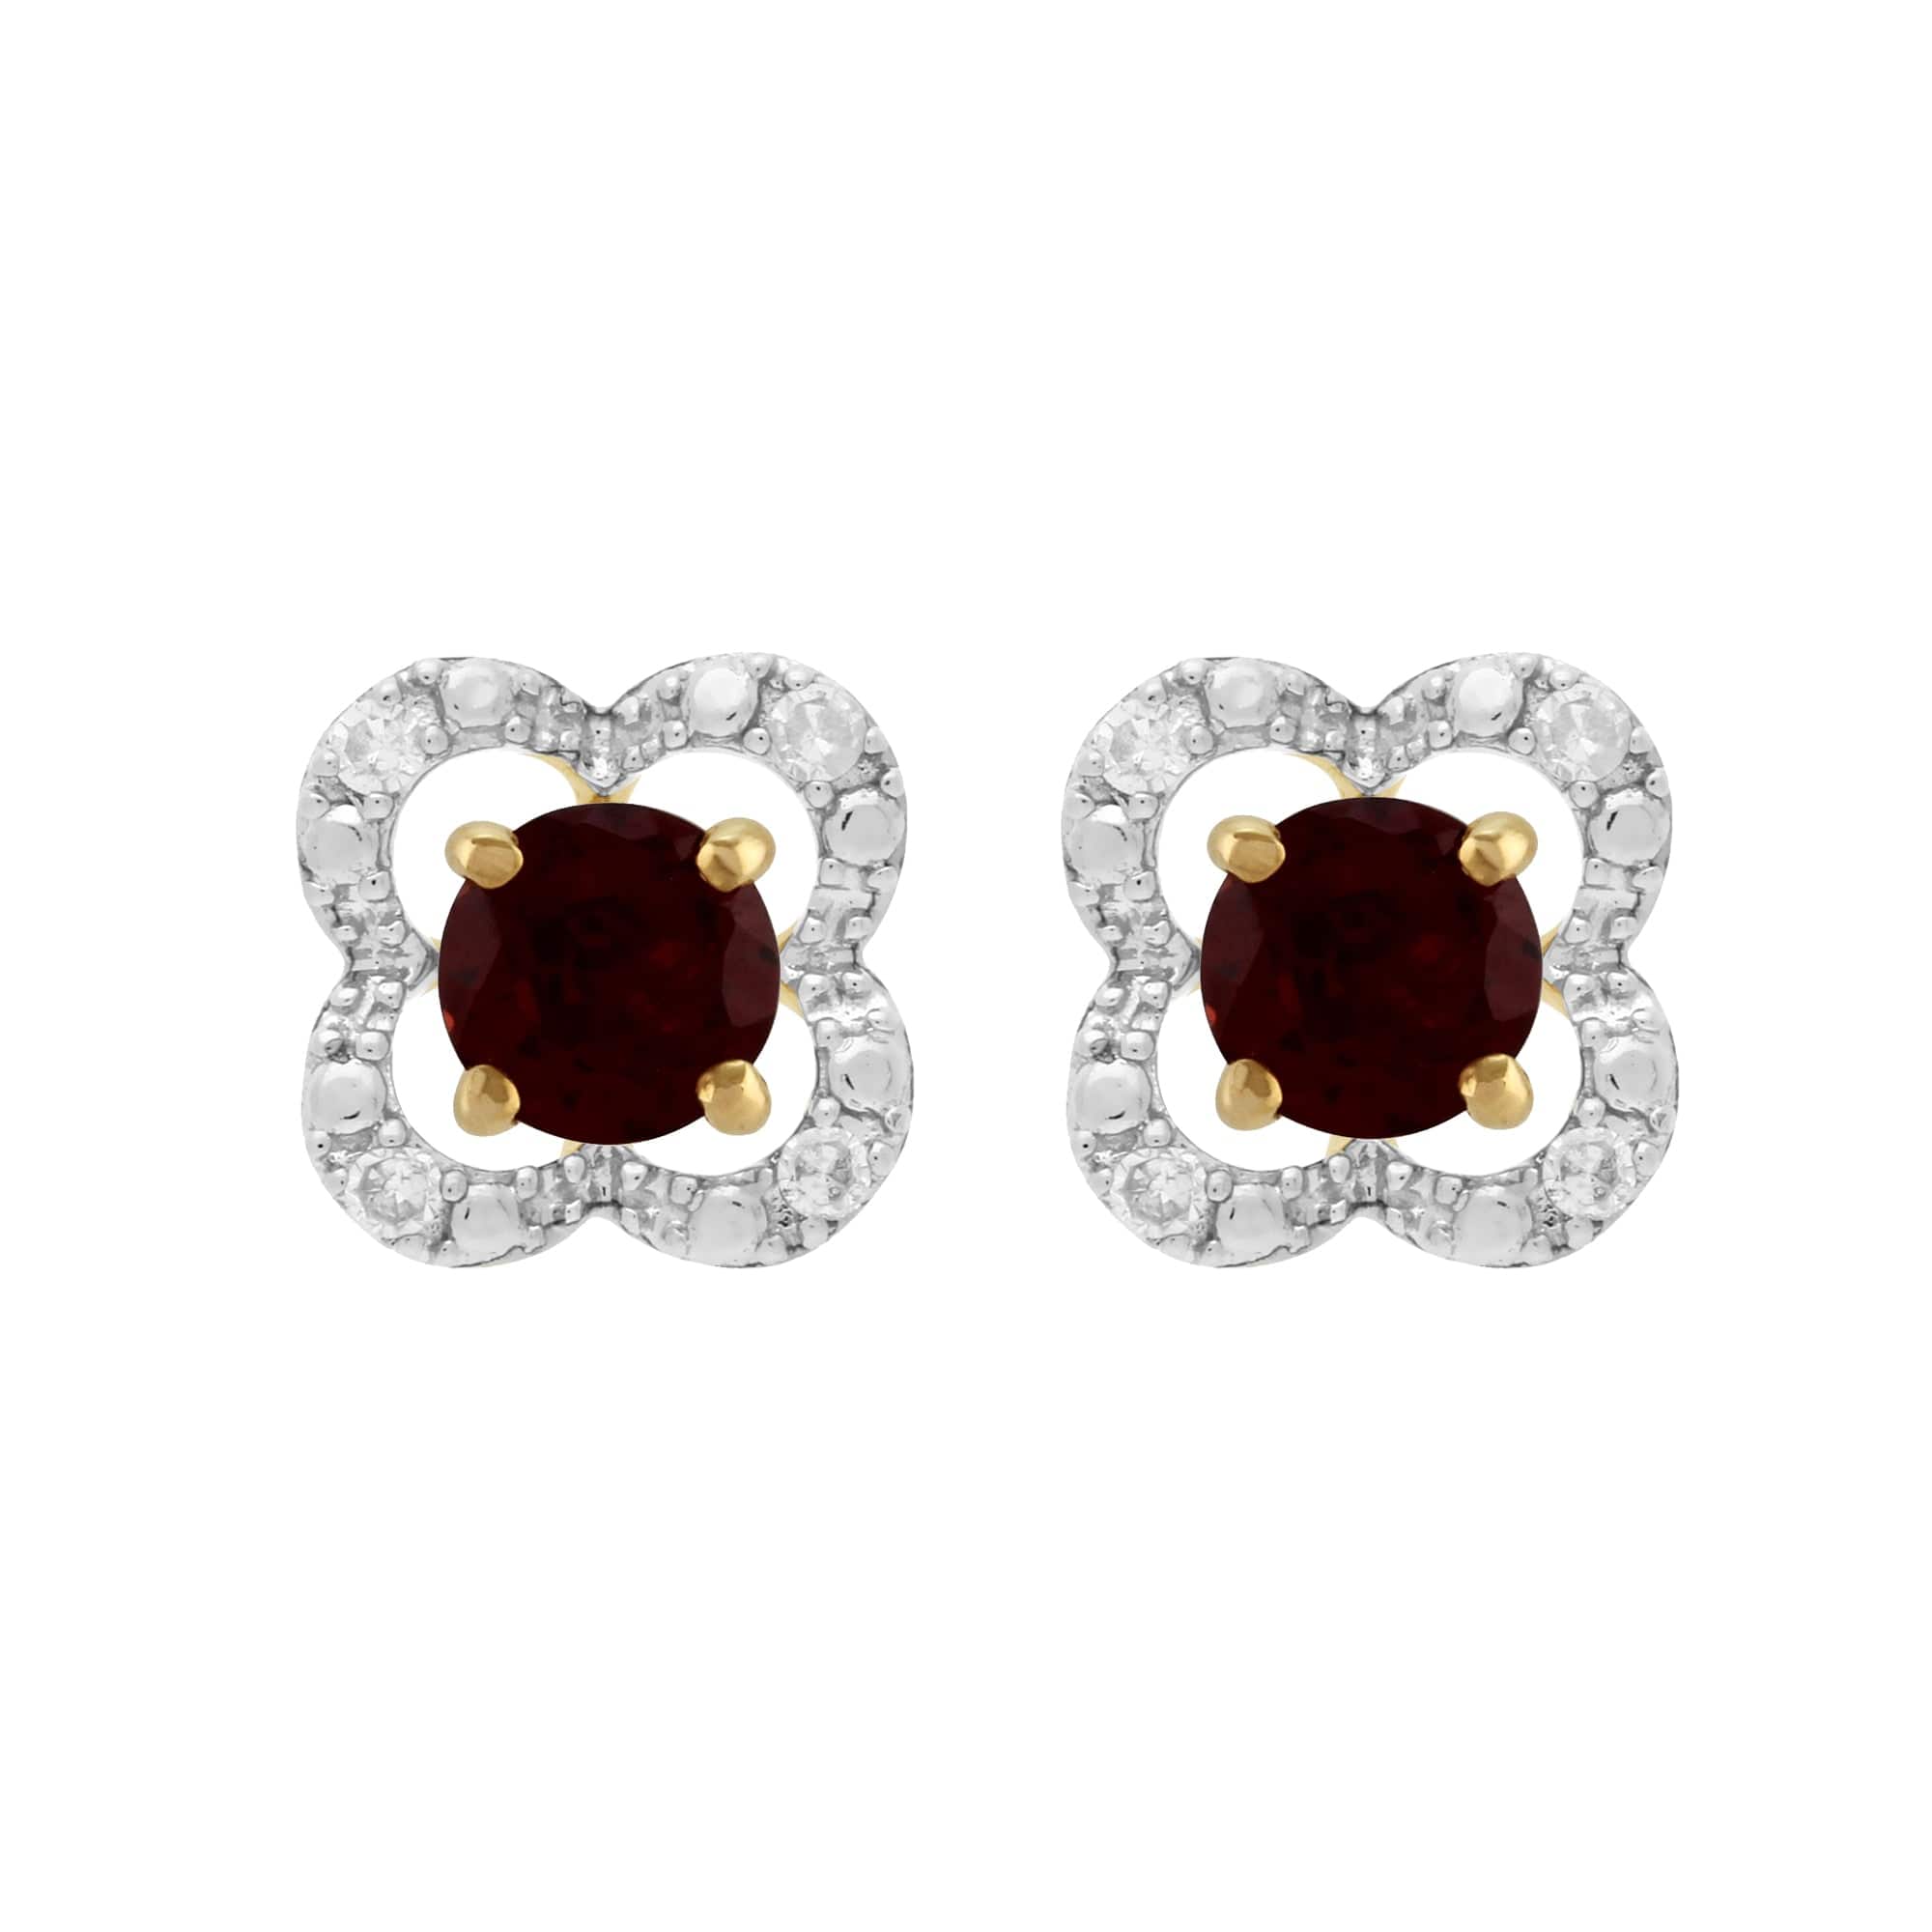 11568-191E0375019 Classic Round Garnet Stud Earrings with Detachable Diamond Floral Ear Jacket in 9ct Yellow Gold 1